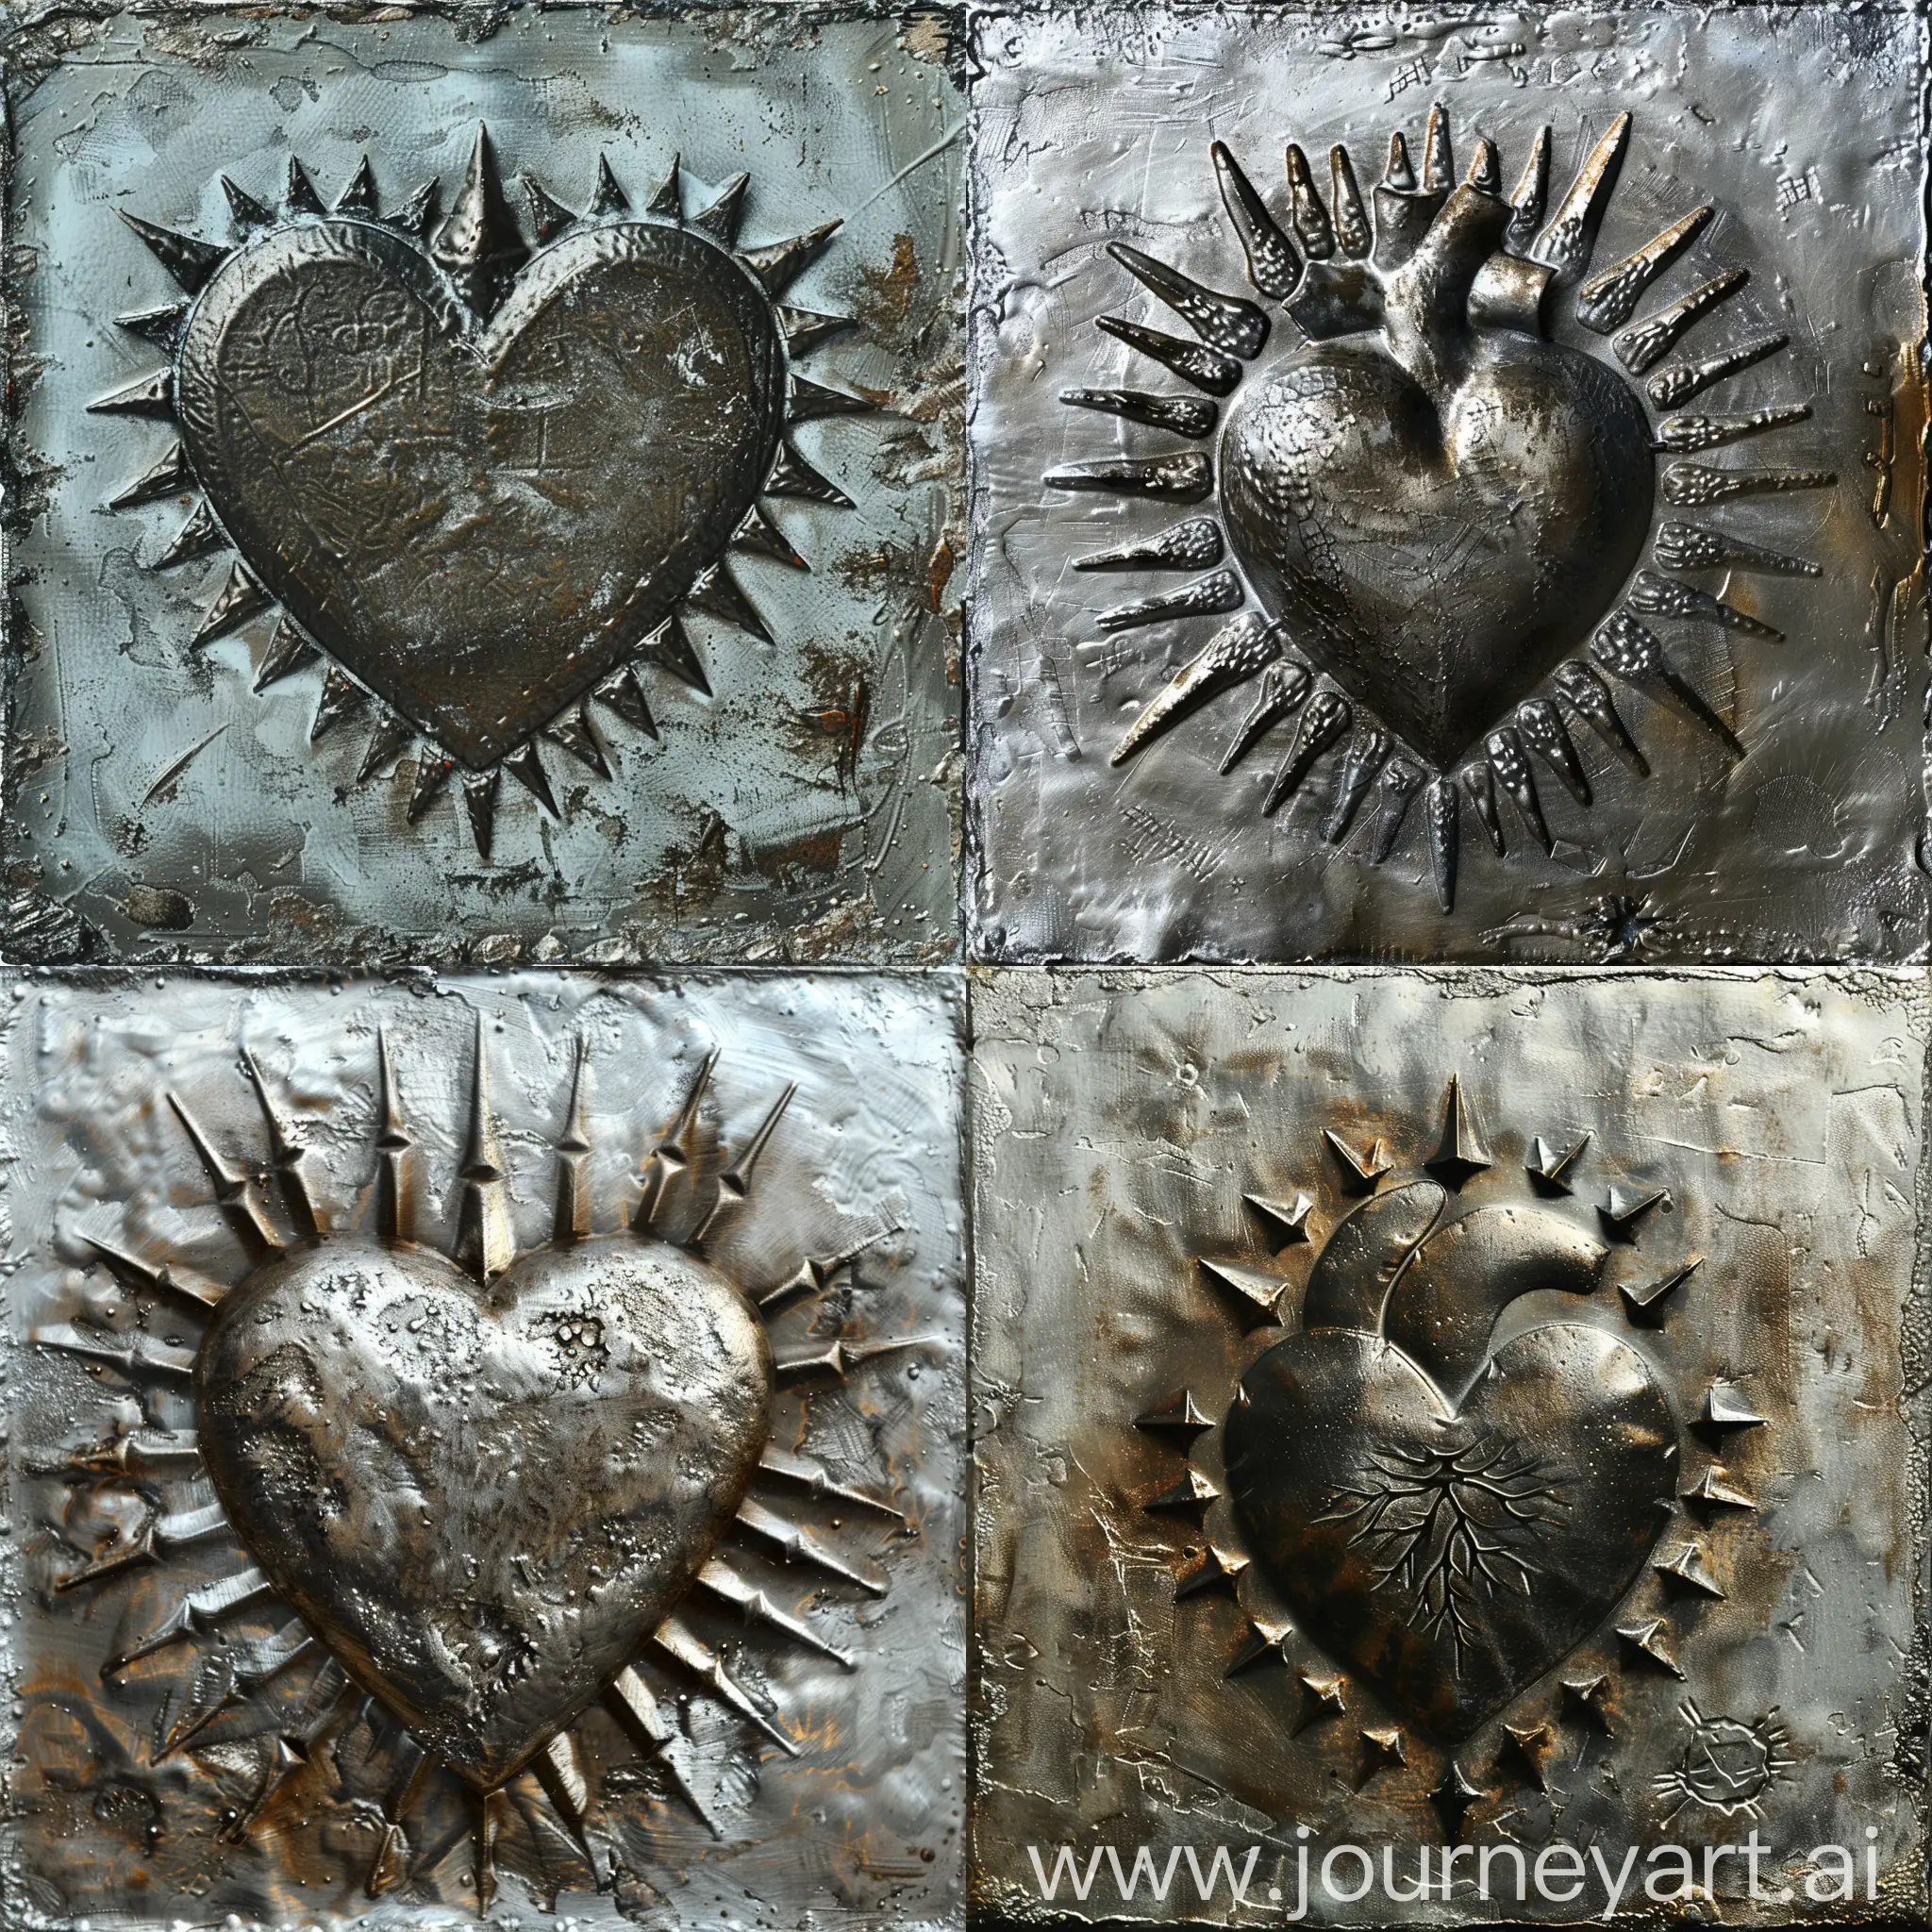 Heart-with-Spikes-Stencil-on-Metal-Panel-Smooth-and-Shiny-Engraved-Ornament-Art